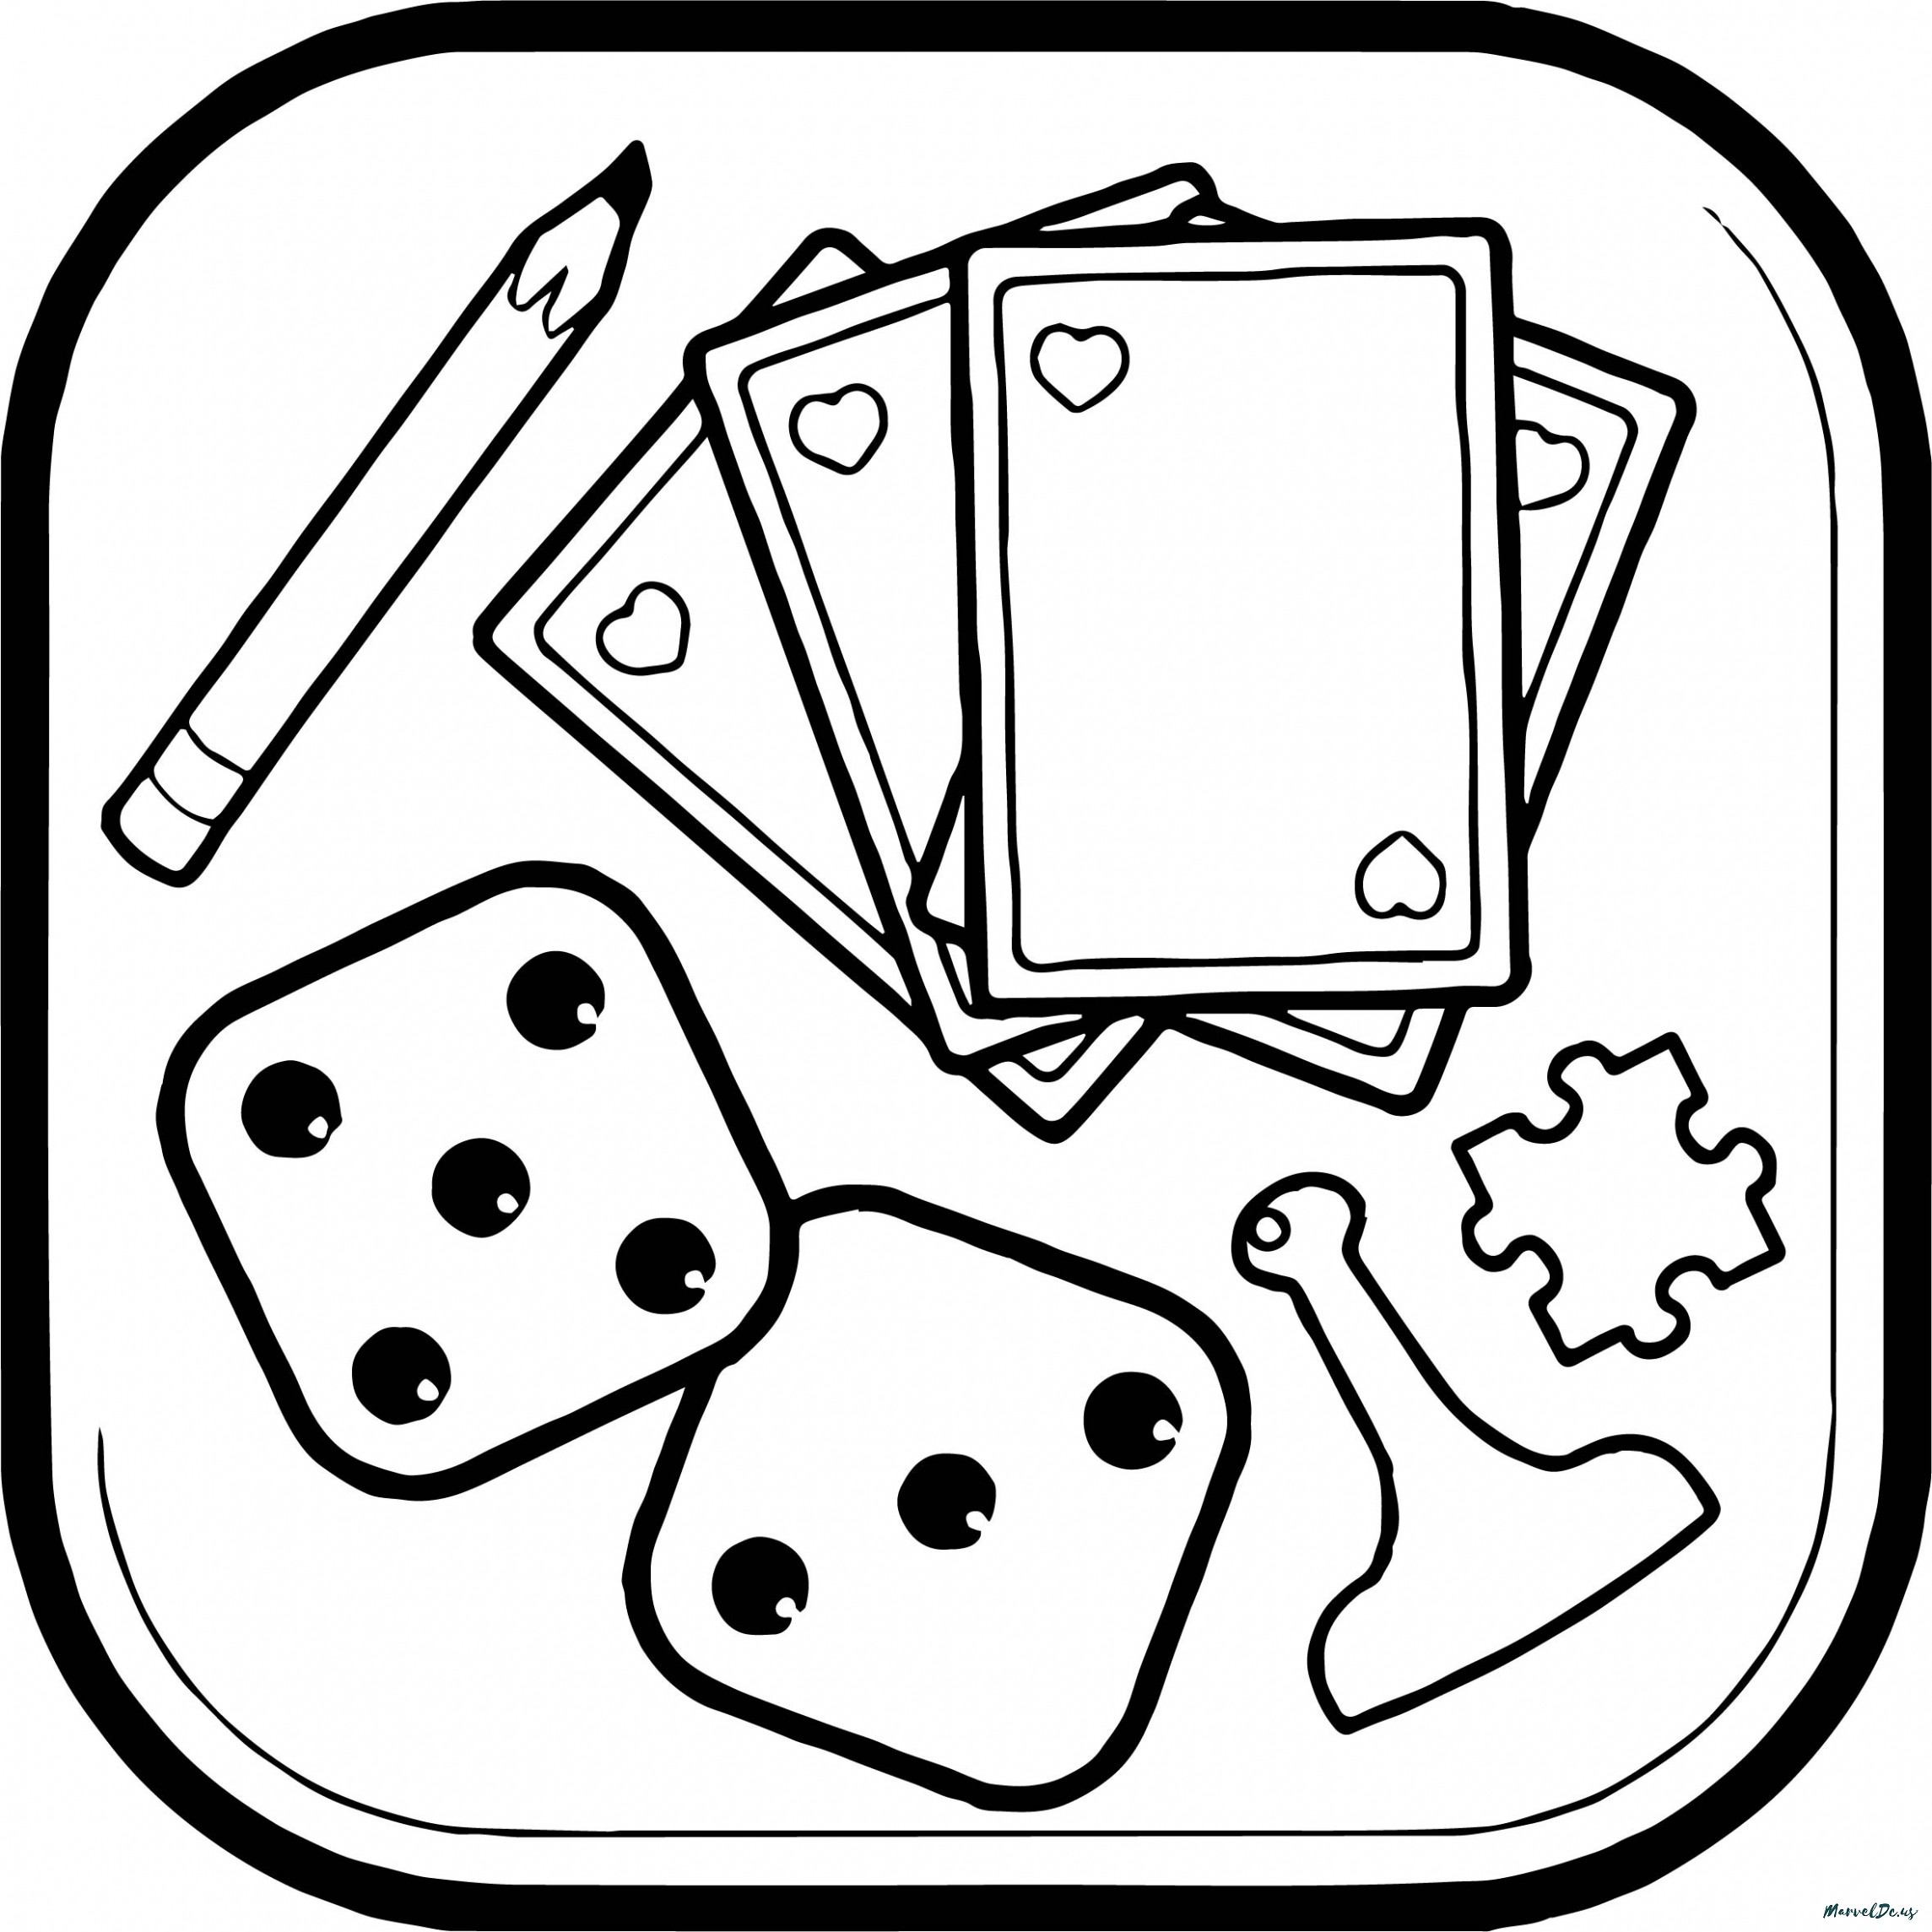 Coloring Games: Coloring Book & Painting for apple download